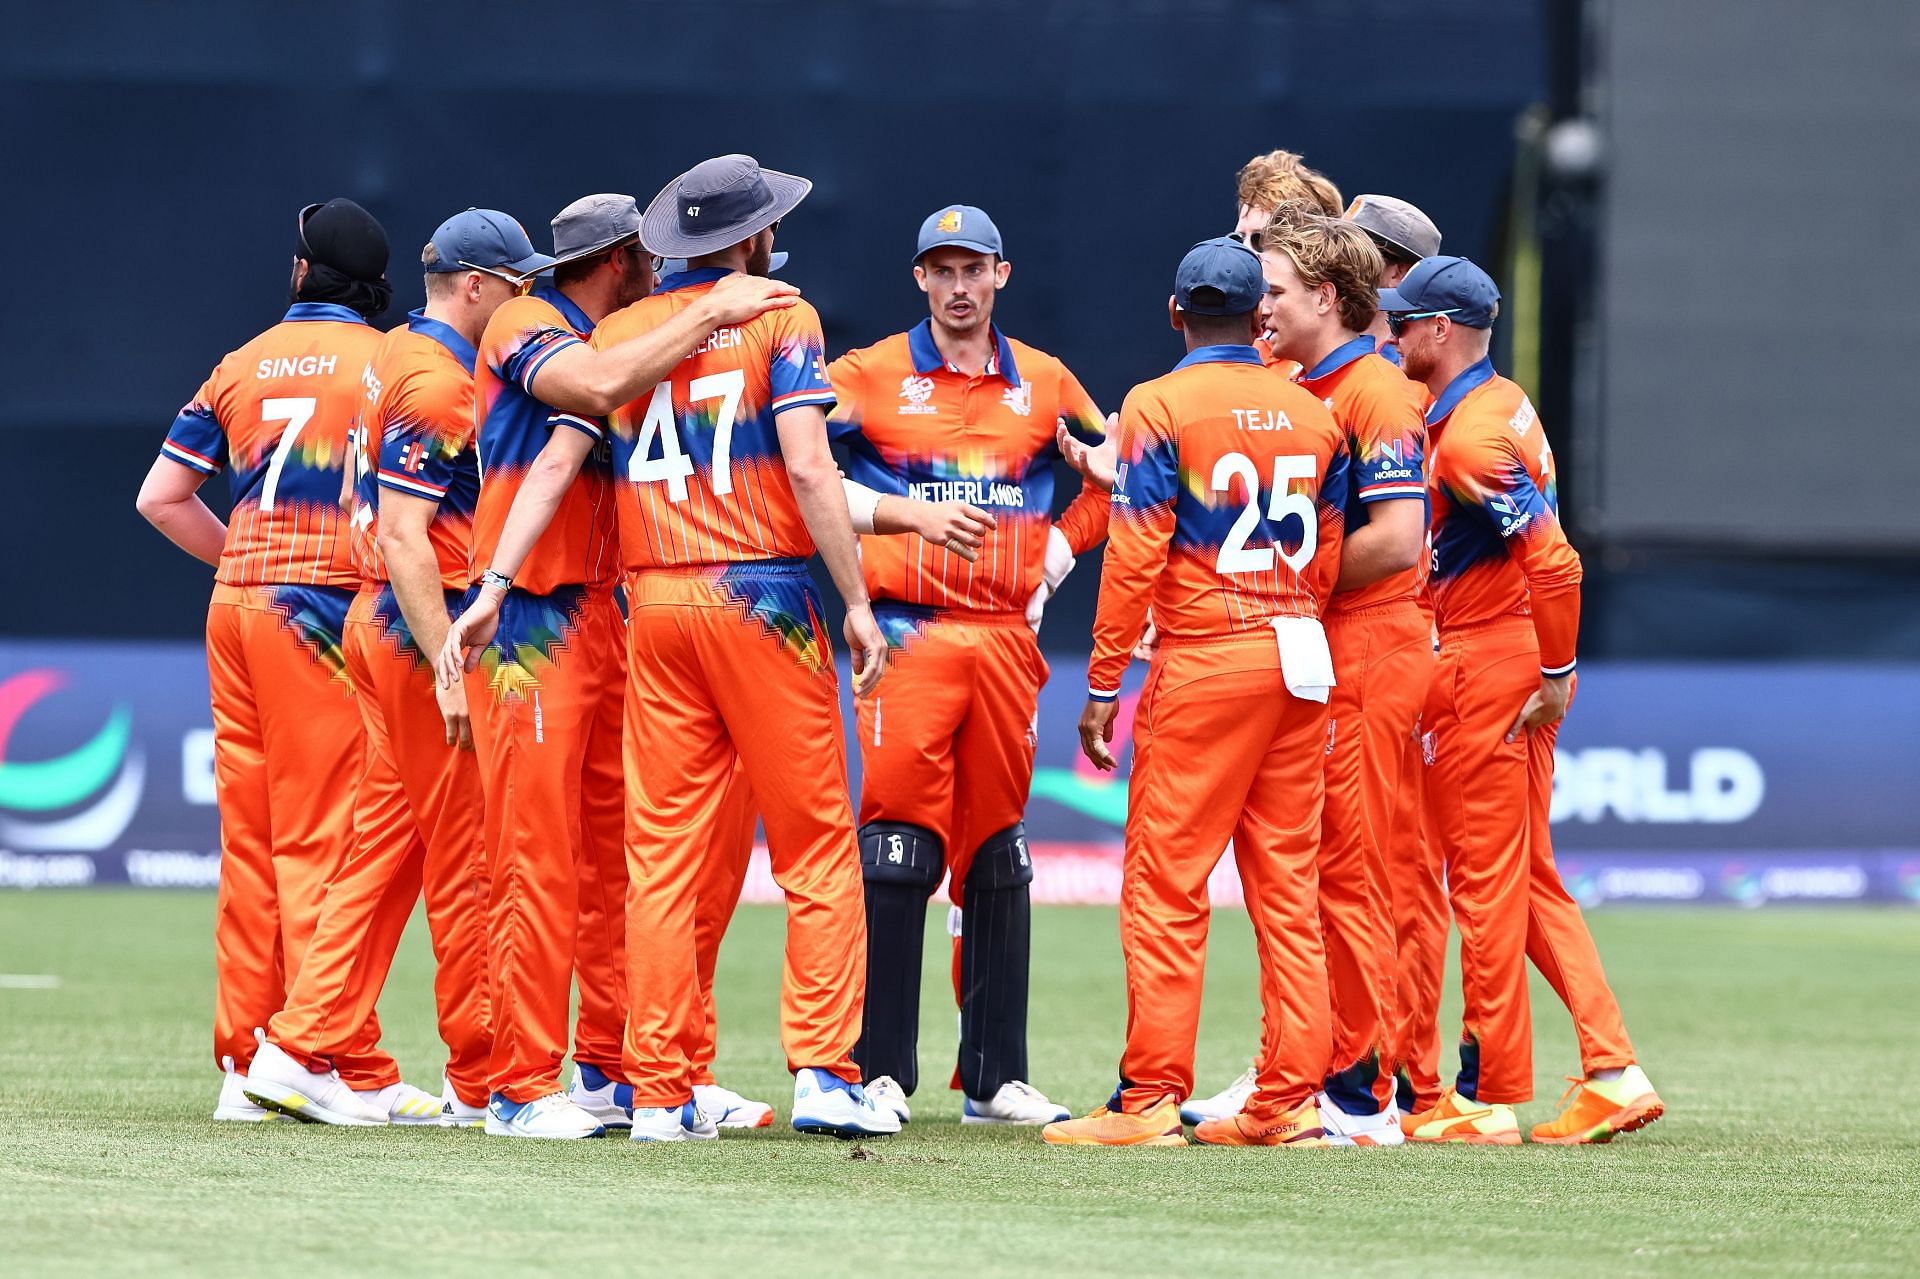 Netherlands vs Sri Lanka, 2024 T20 World Cup: Probable playing XIs, pitch report, weather forecast, and live-streaming details